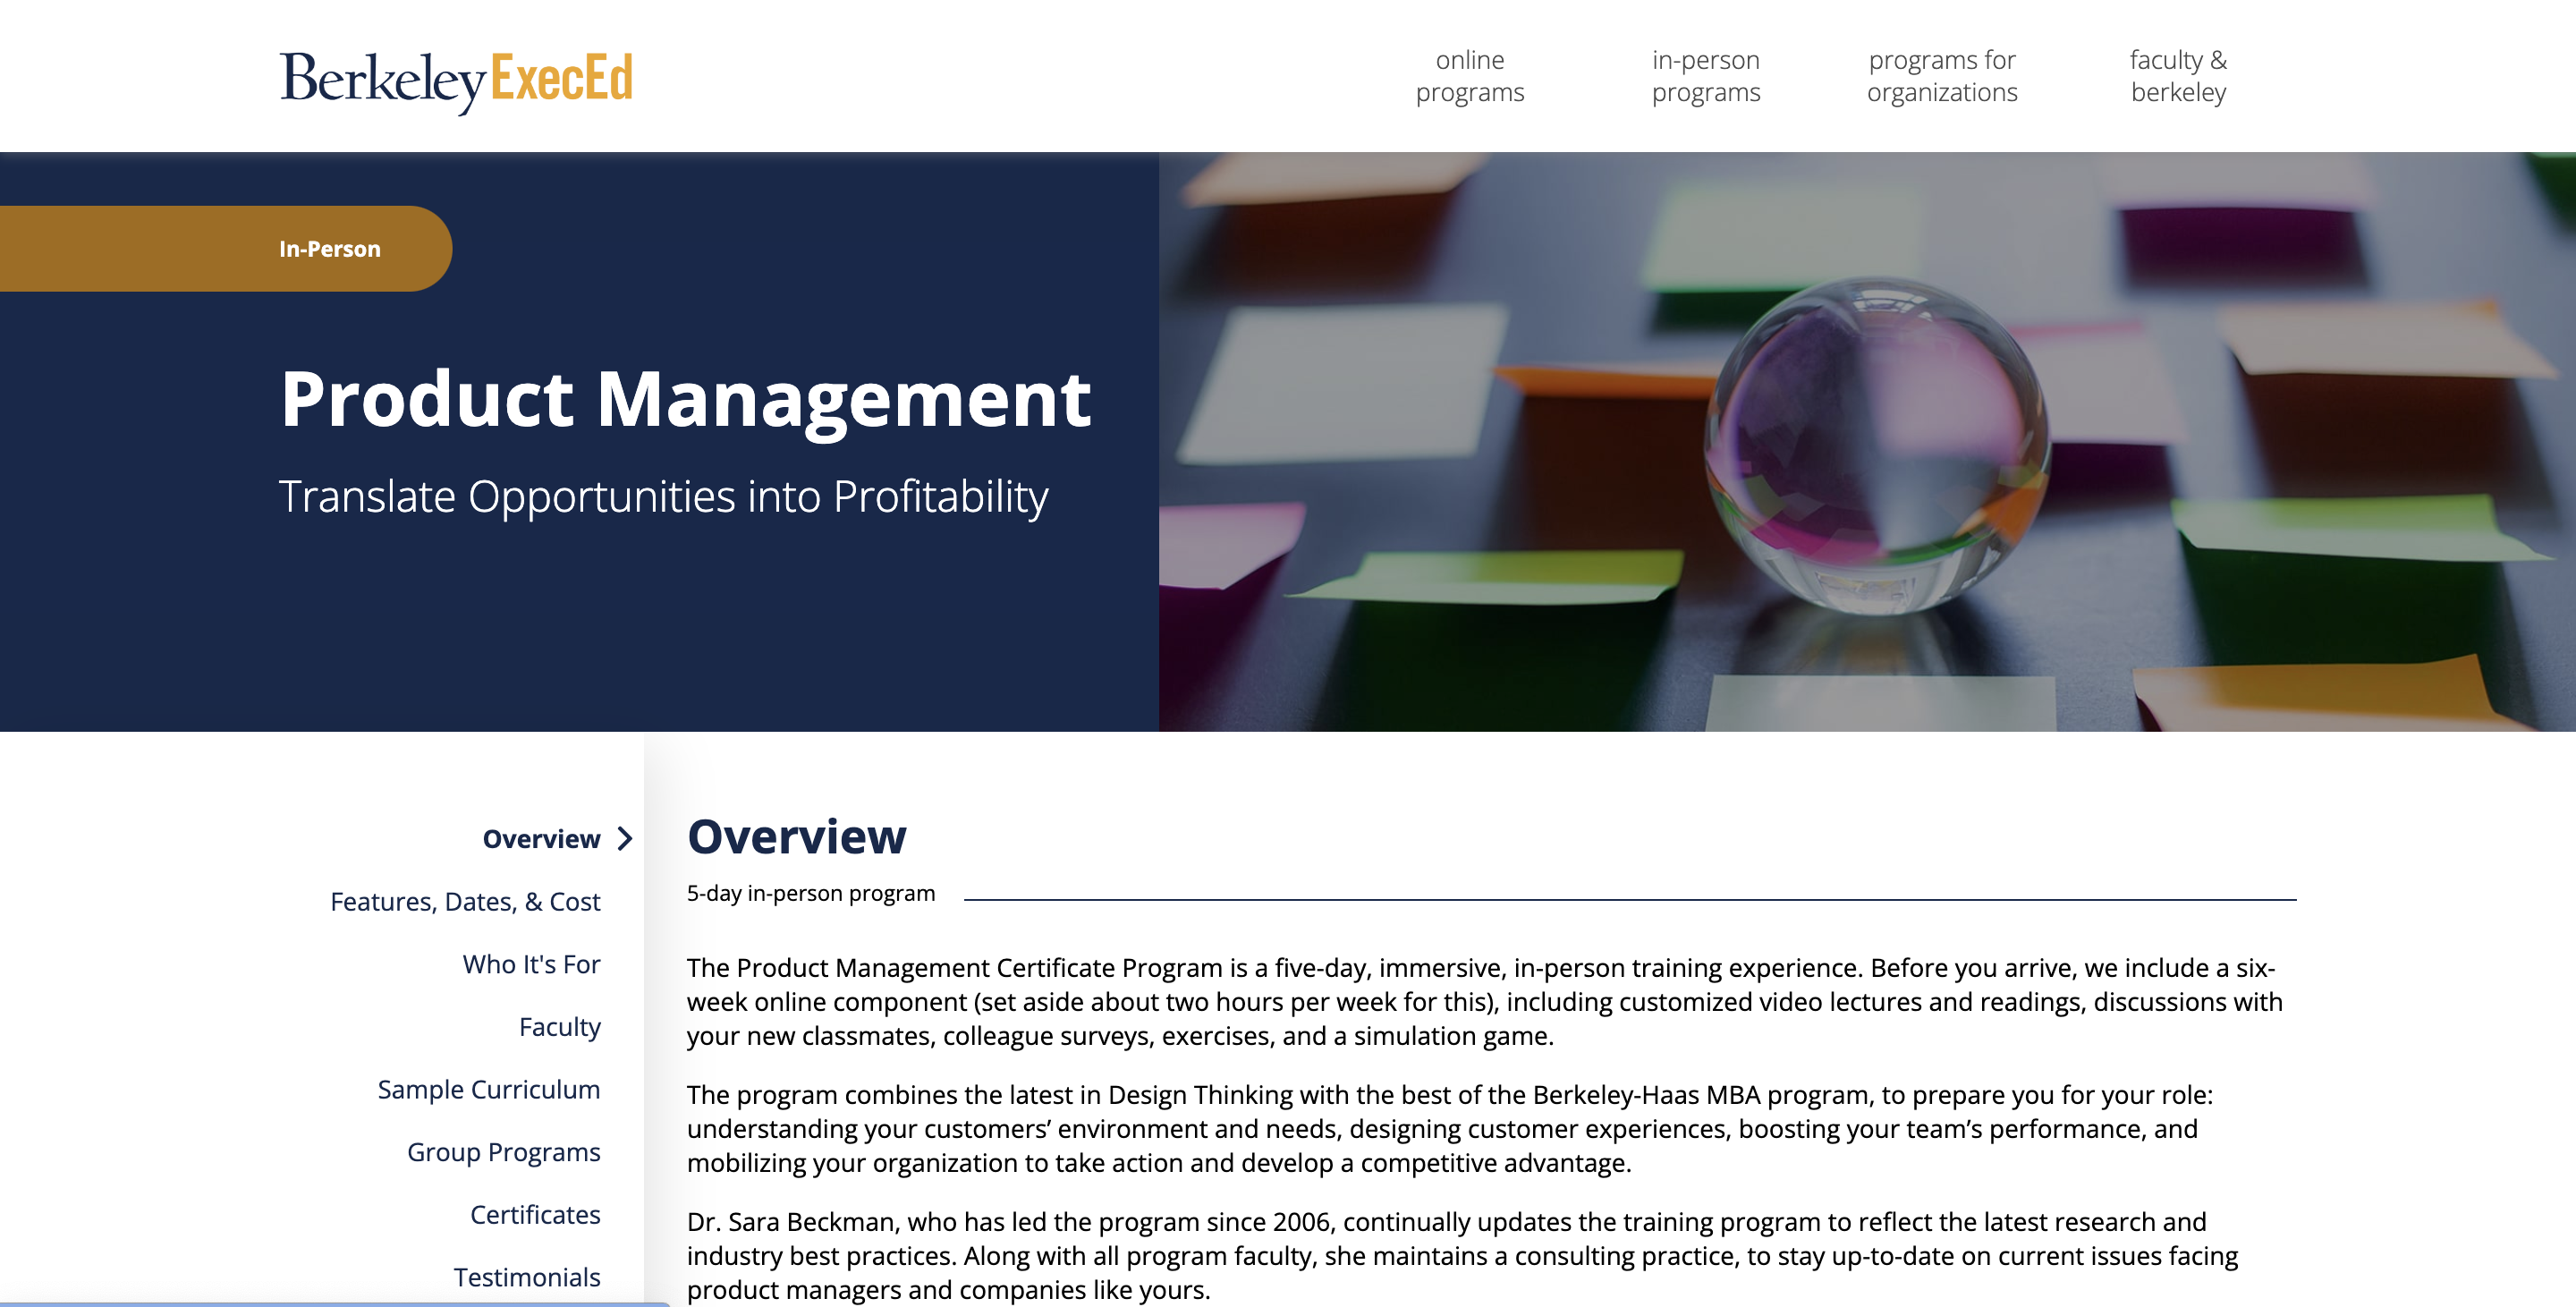 Product Management course by Berkeley